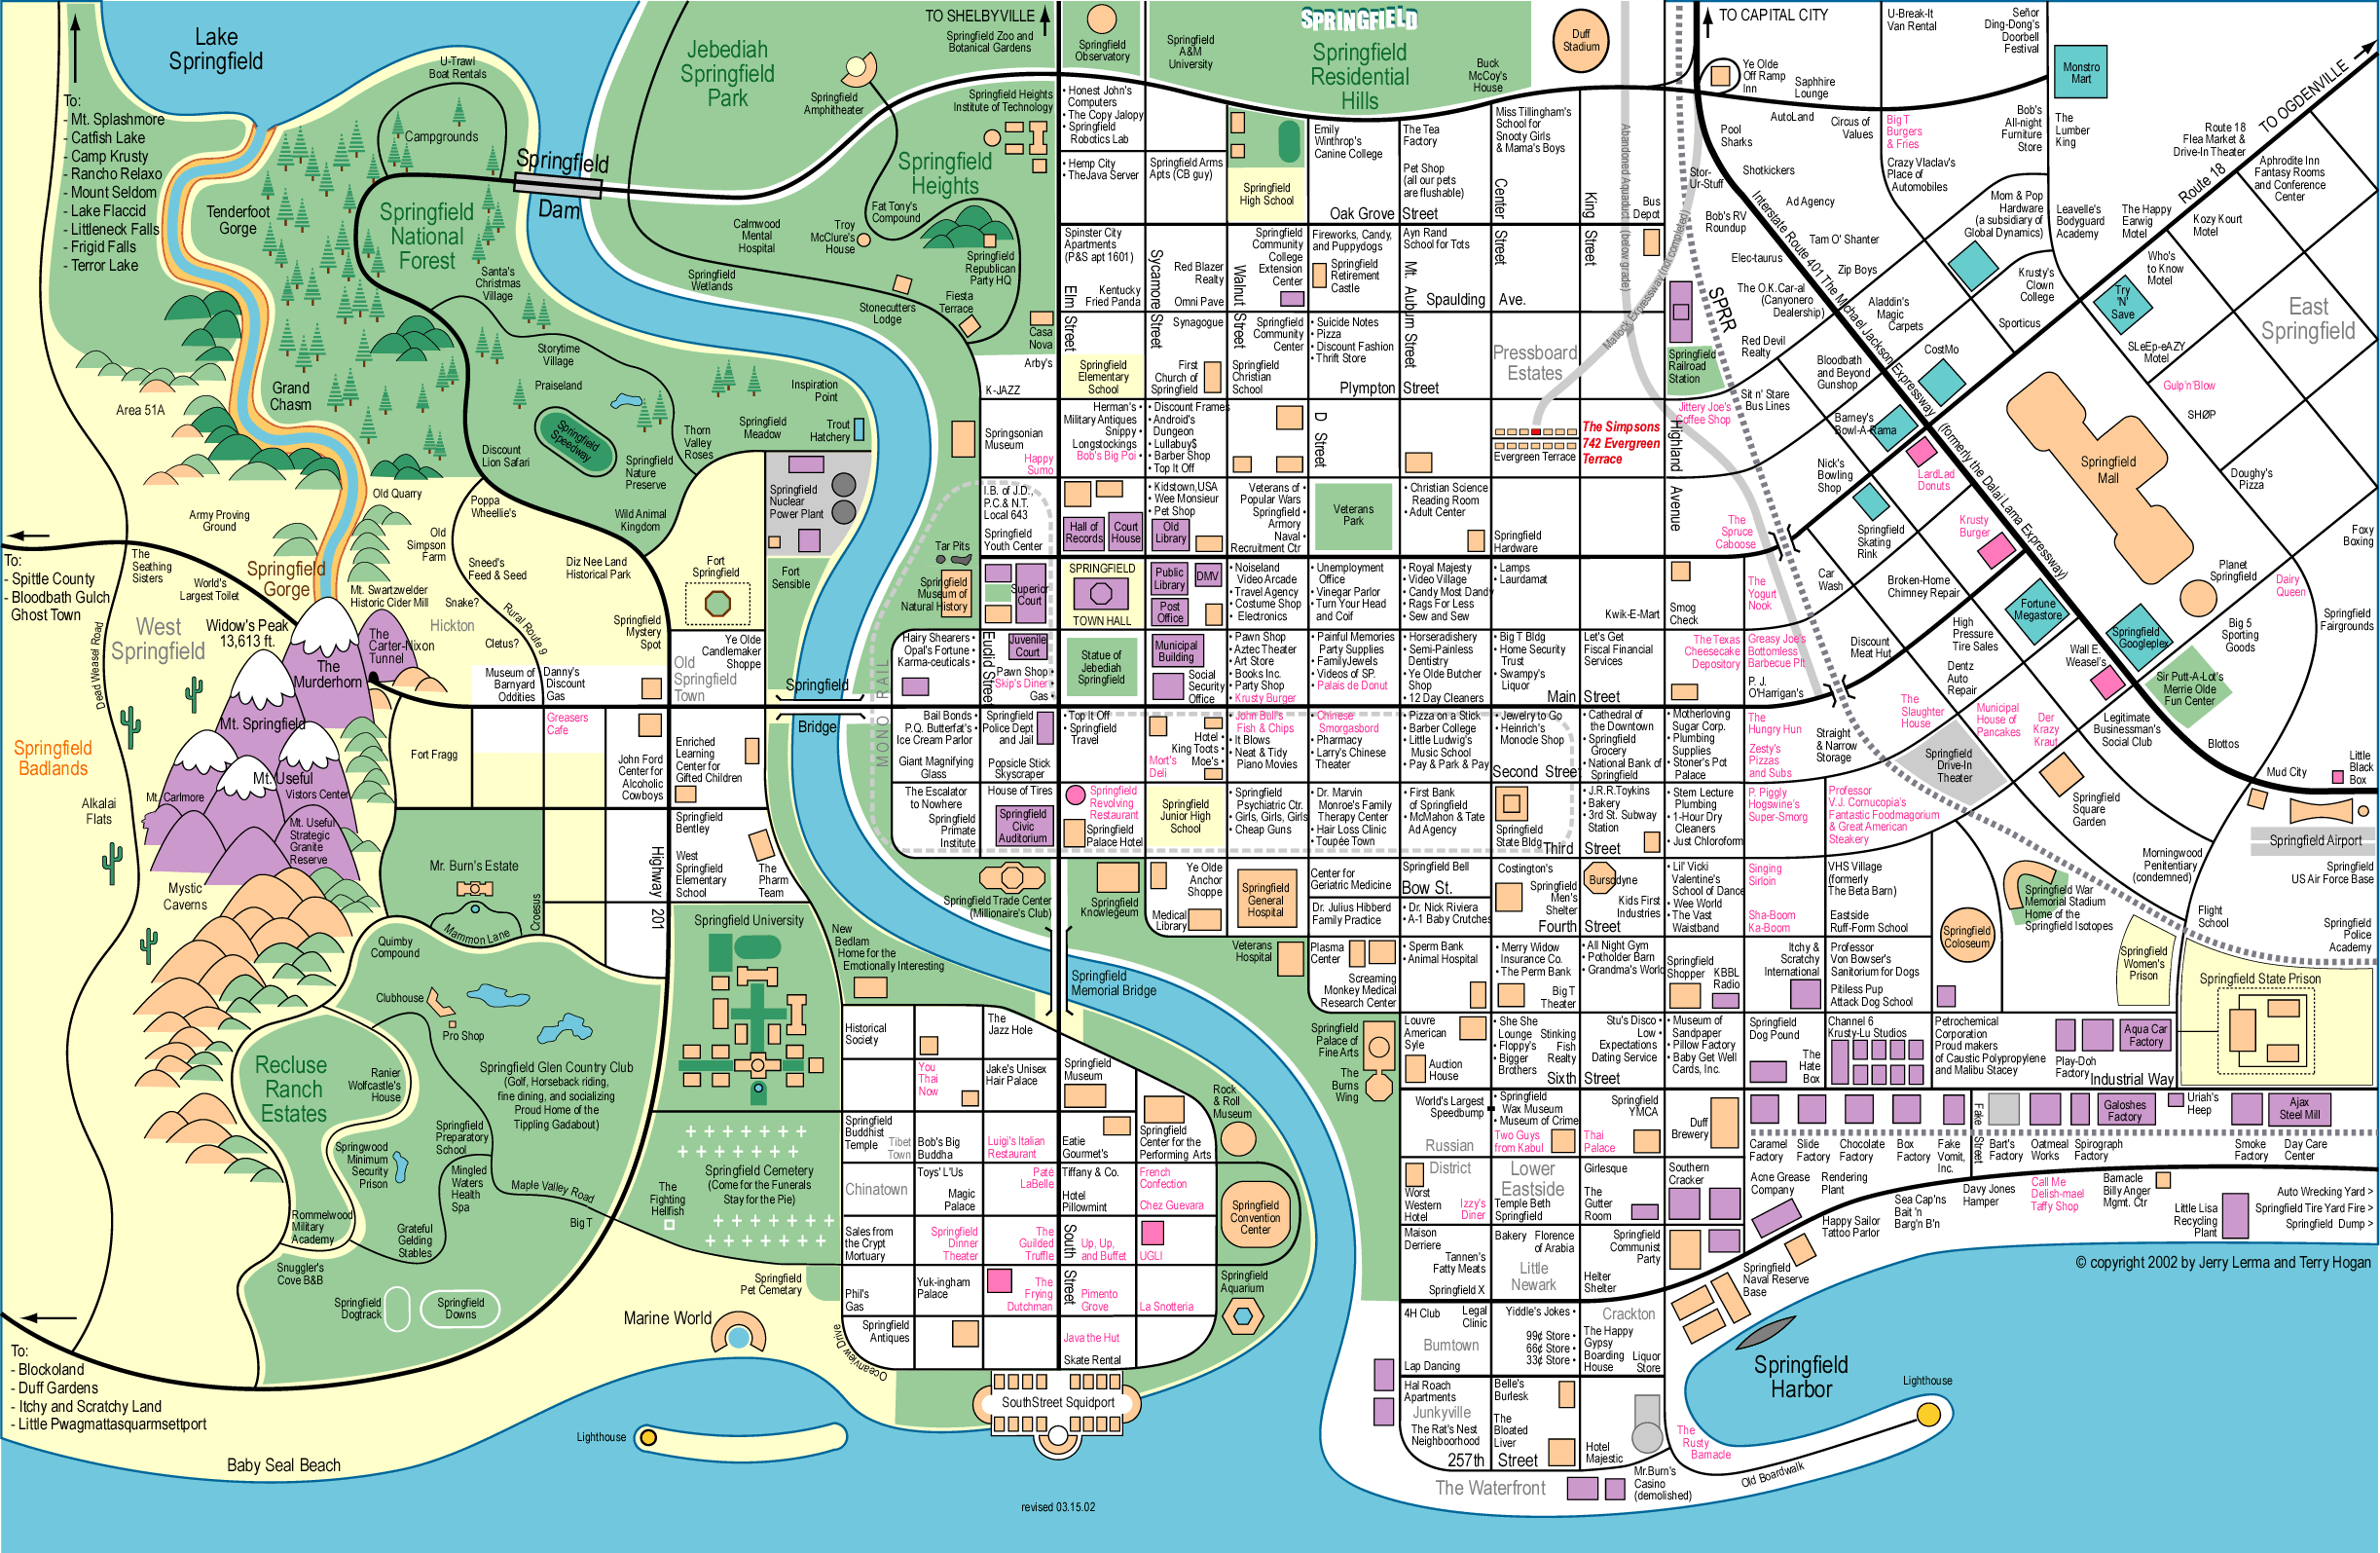 http://www.craphound.com/images/map_of_springfield.gif